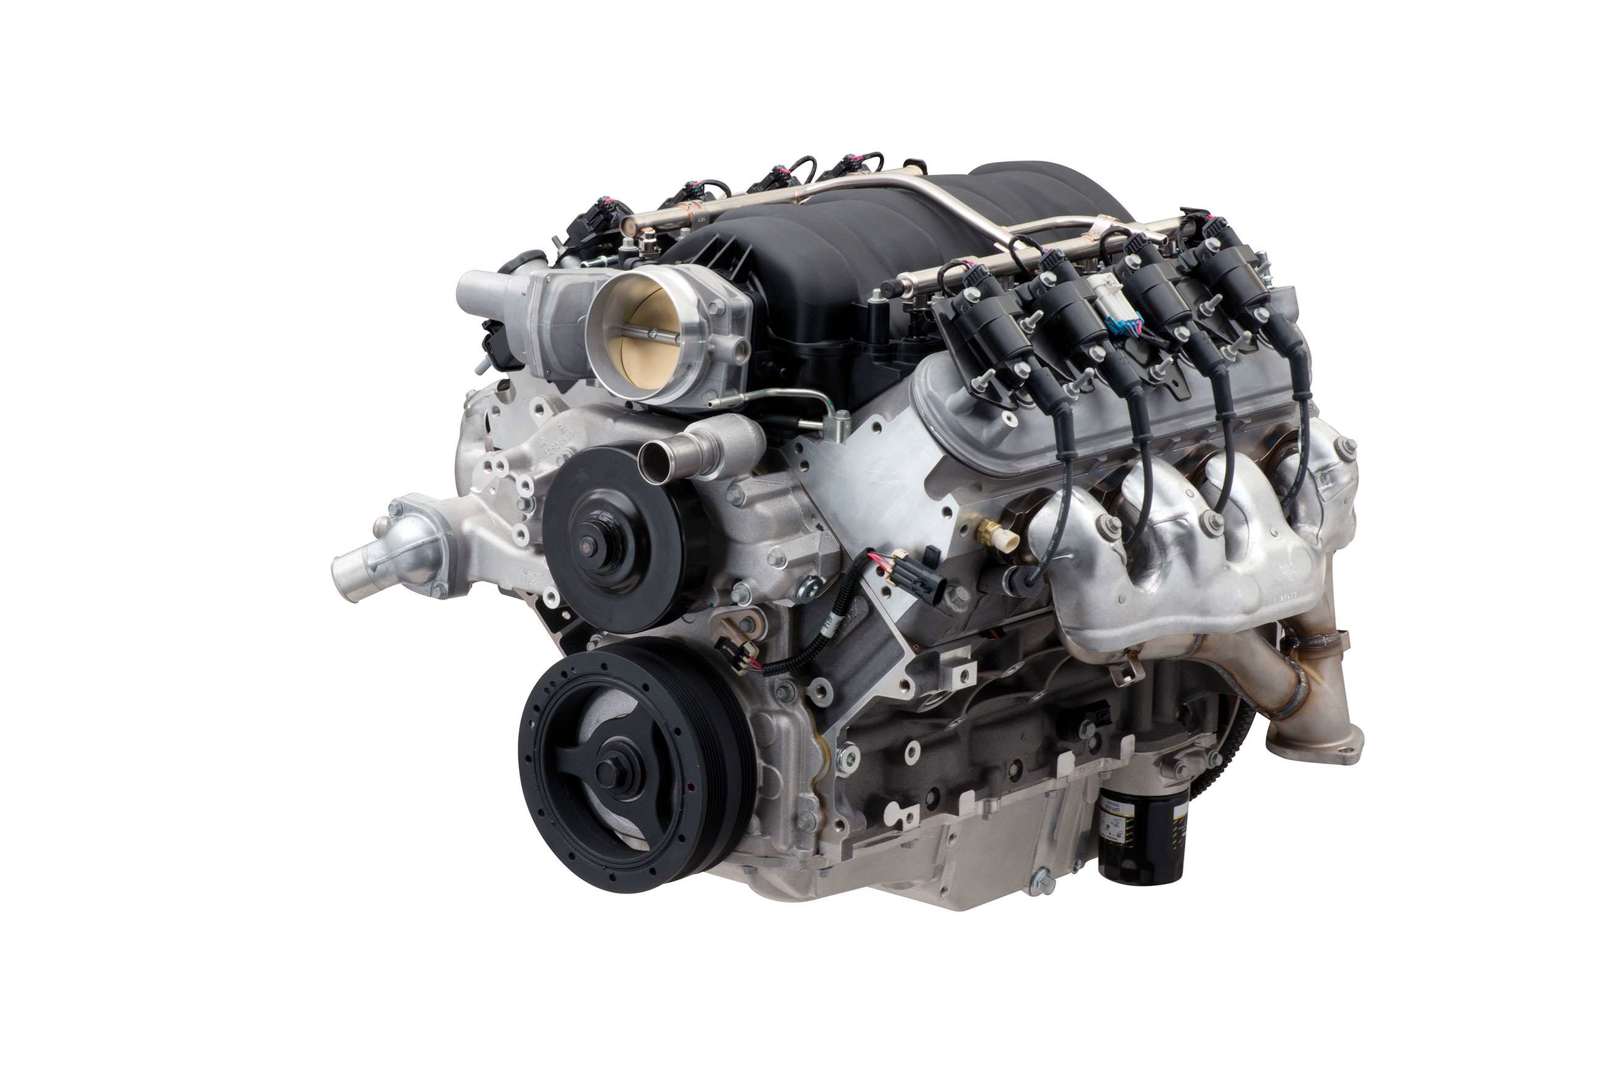 There's a new ready-to-run Chevrolet V8 crate engine with 570PS | GRR